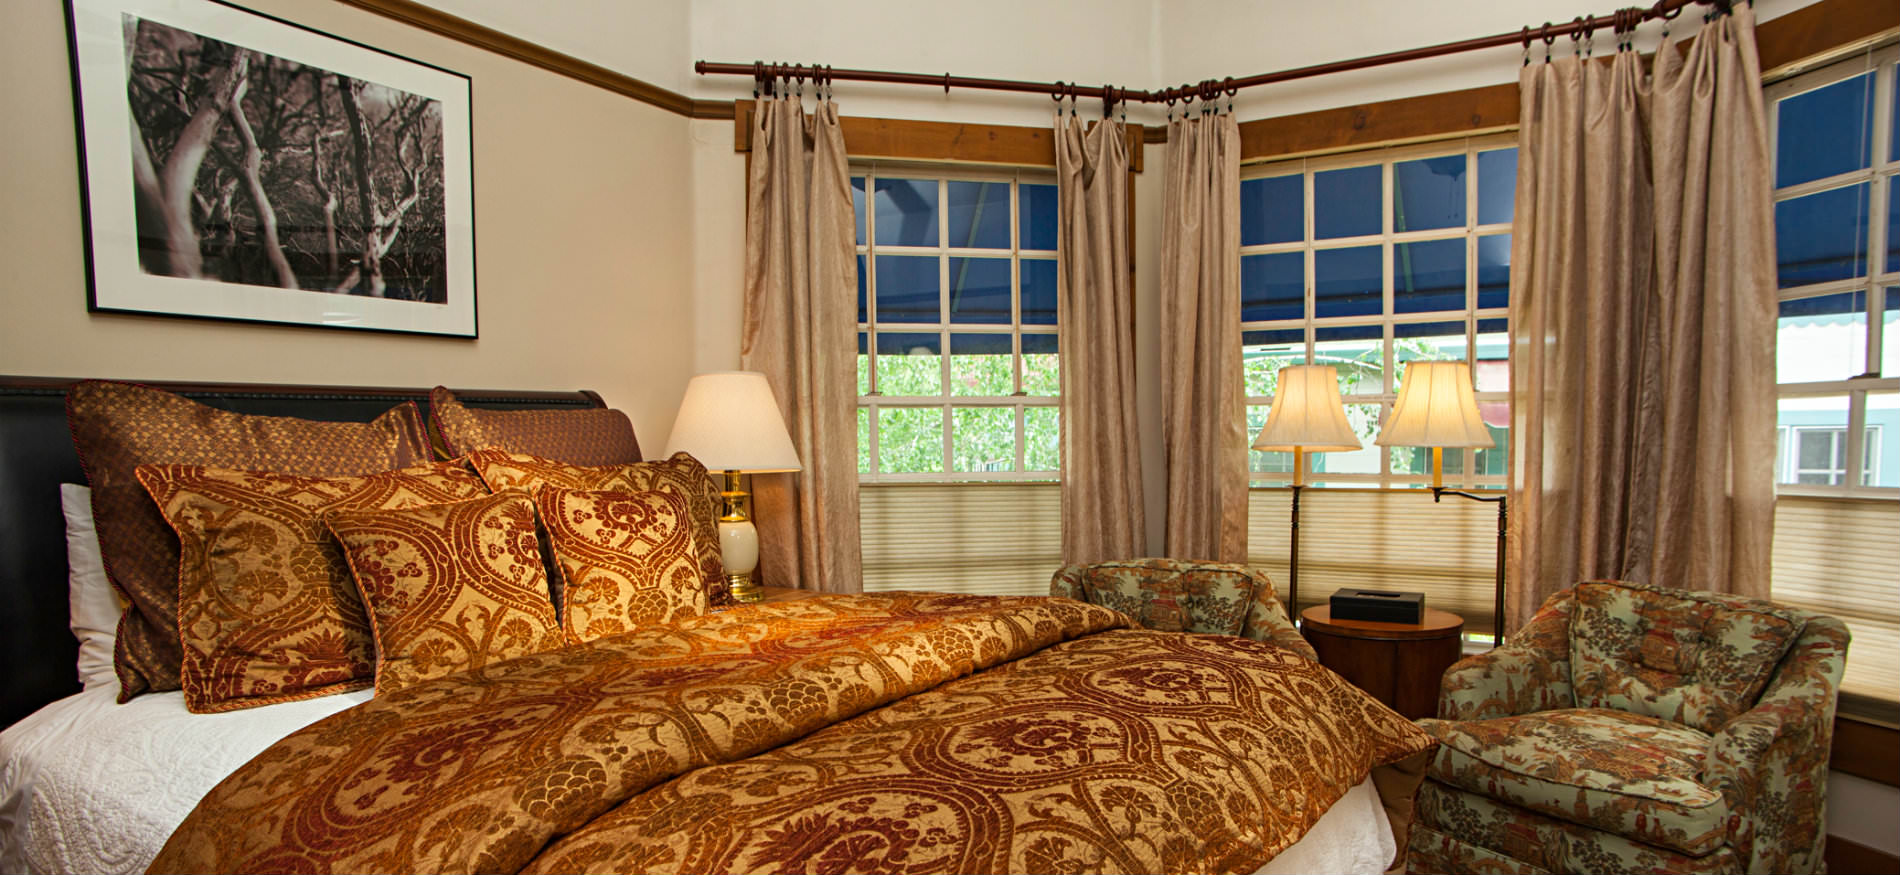 Bedroom with bay window, bed covered in red and gold pillows and comforter, two chairs and small table